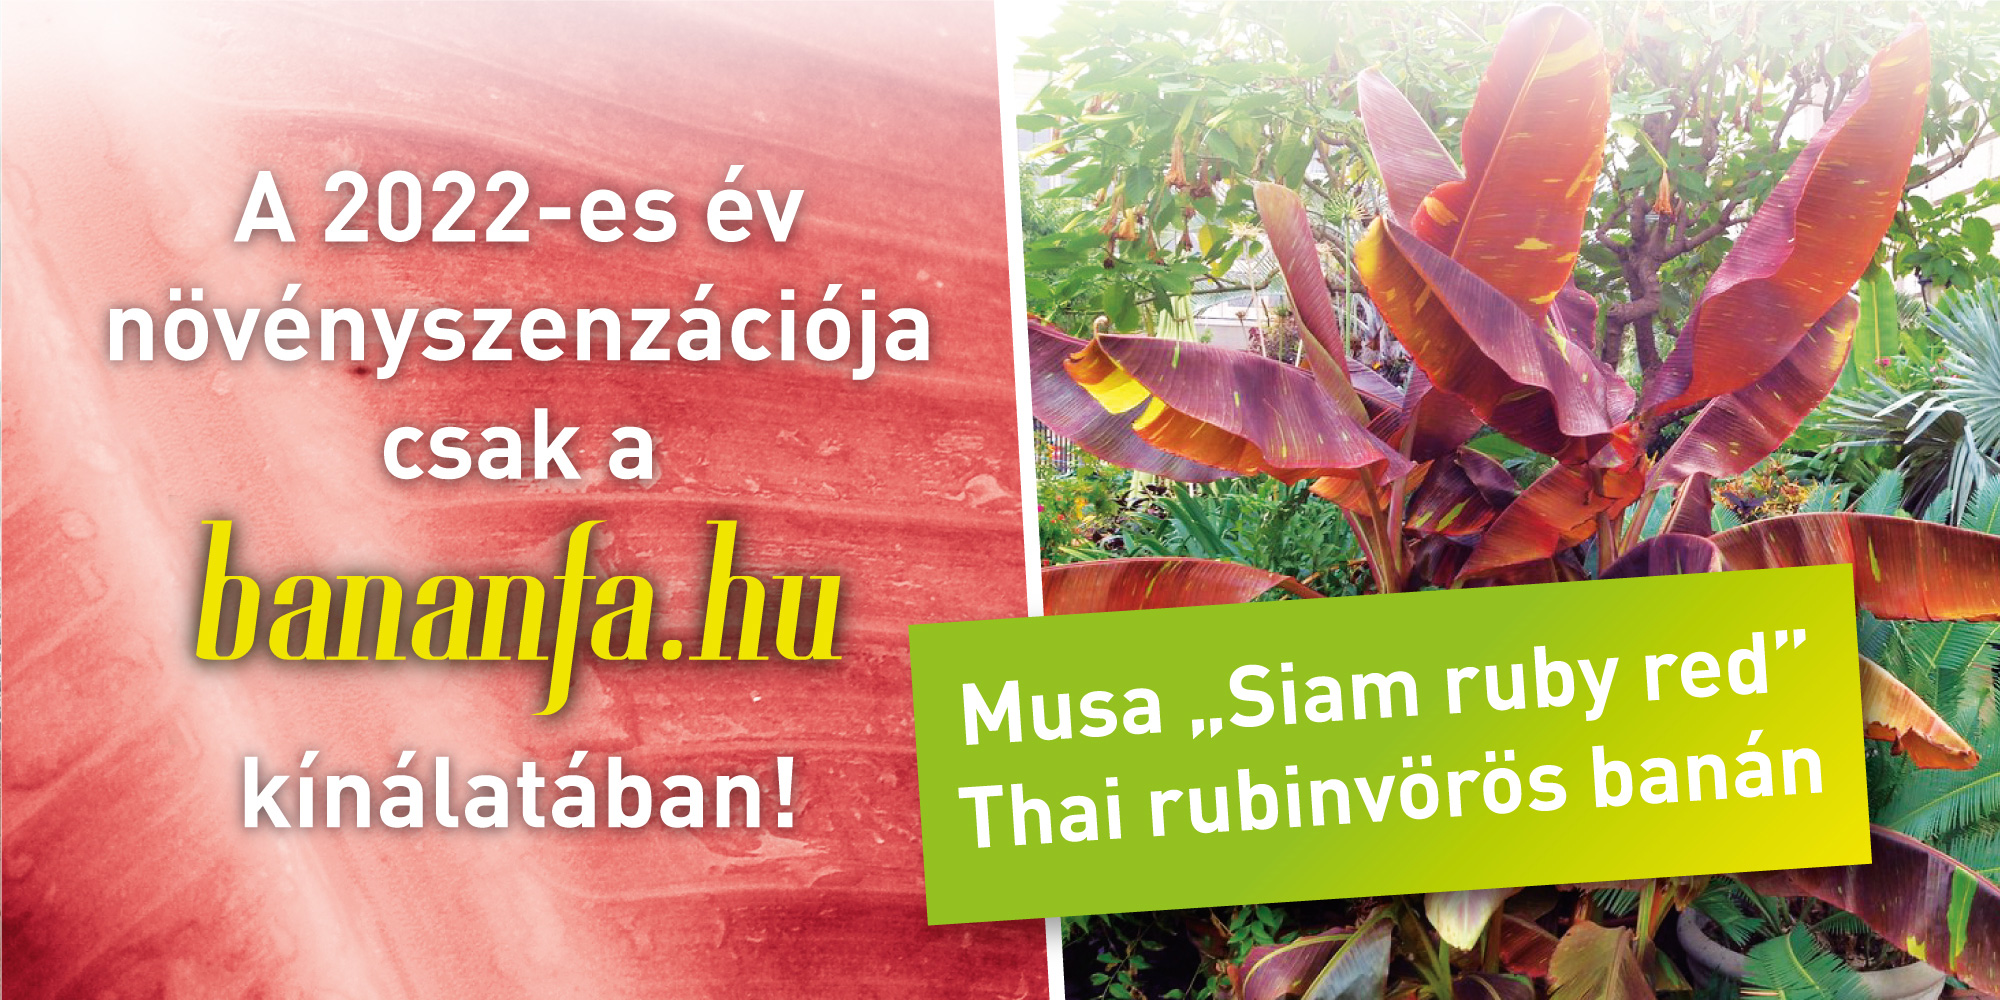 Musa „Siam ruby red”